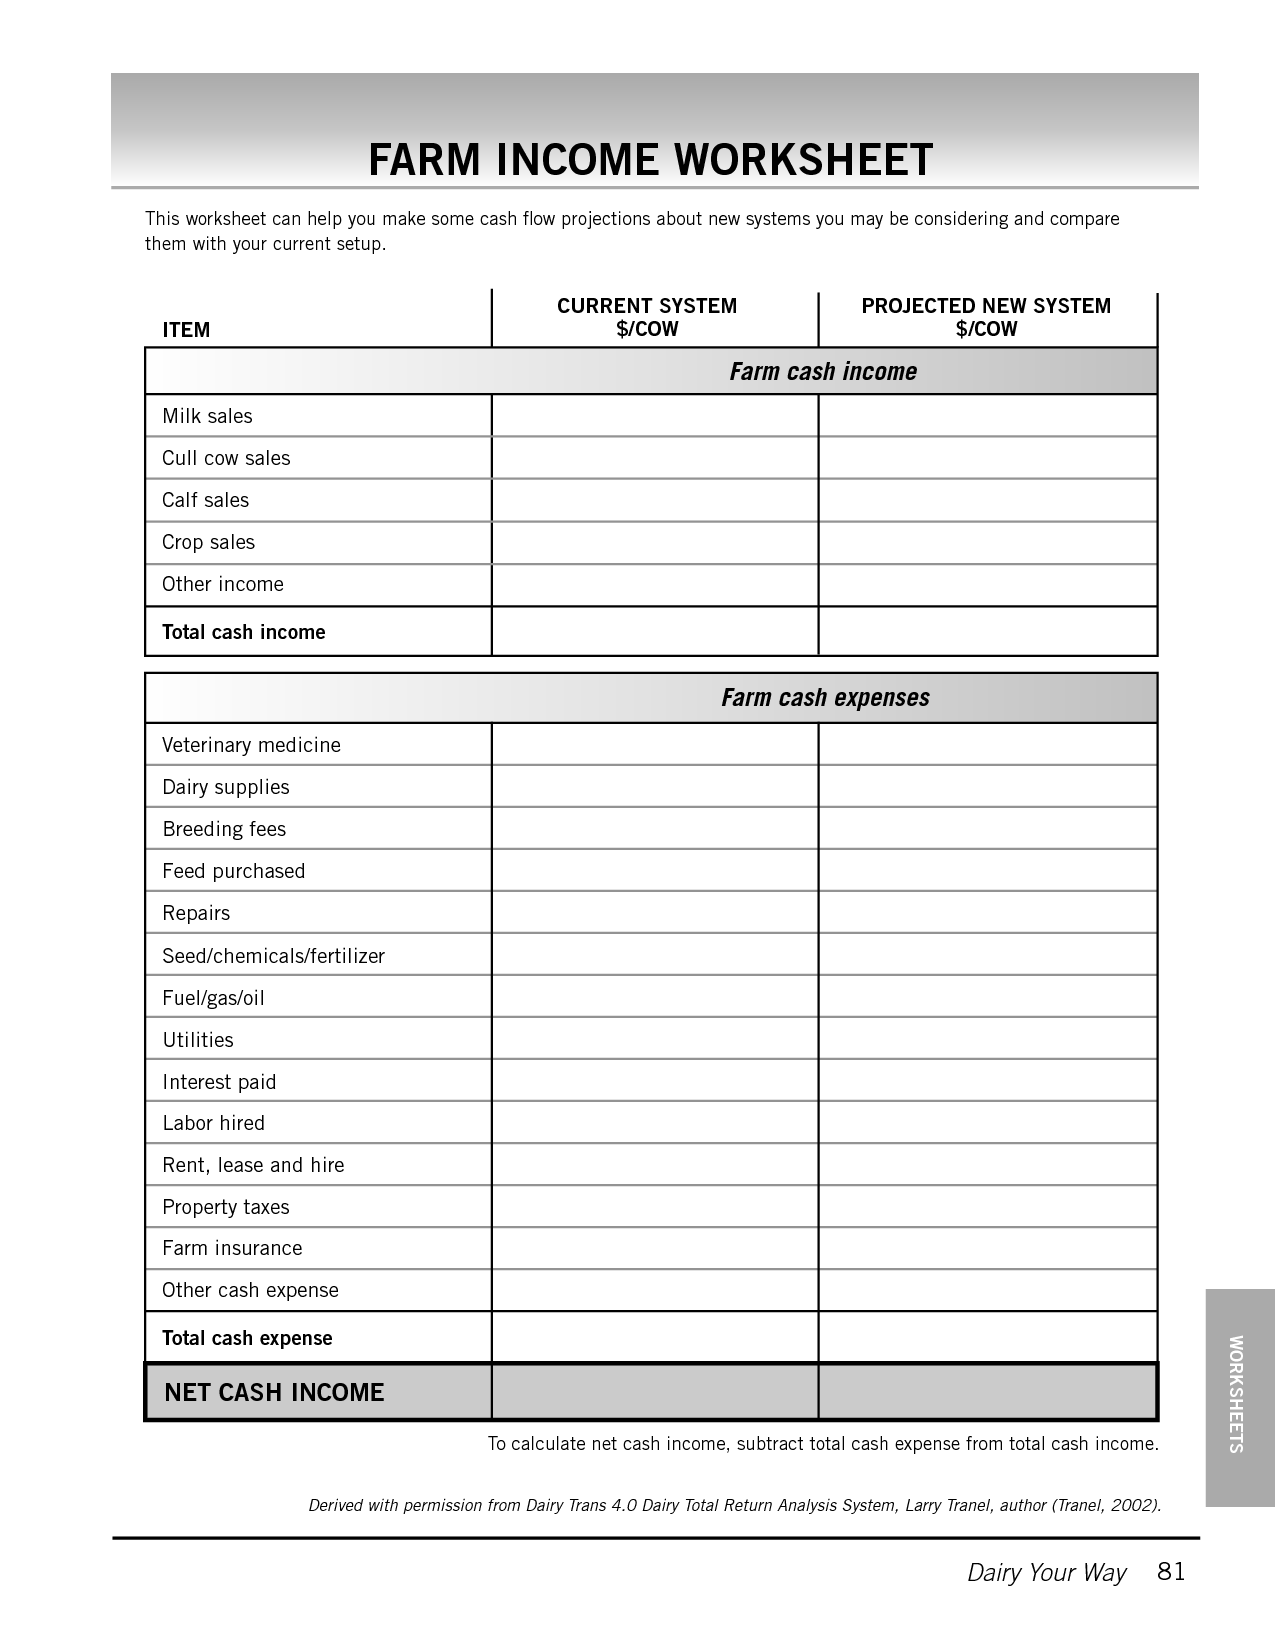 farm-income-and-expense-worksheet